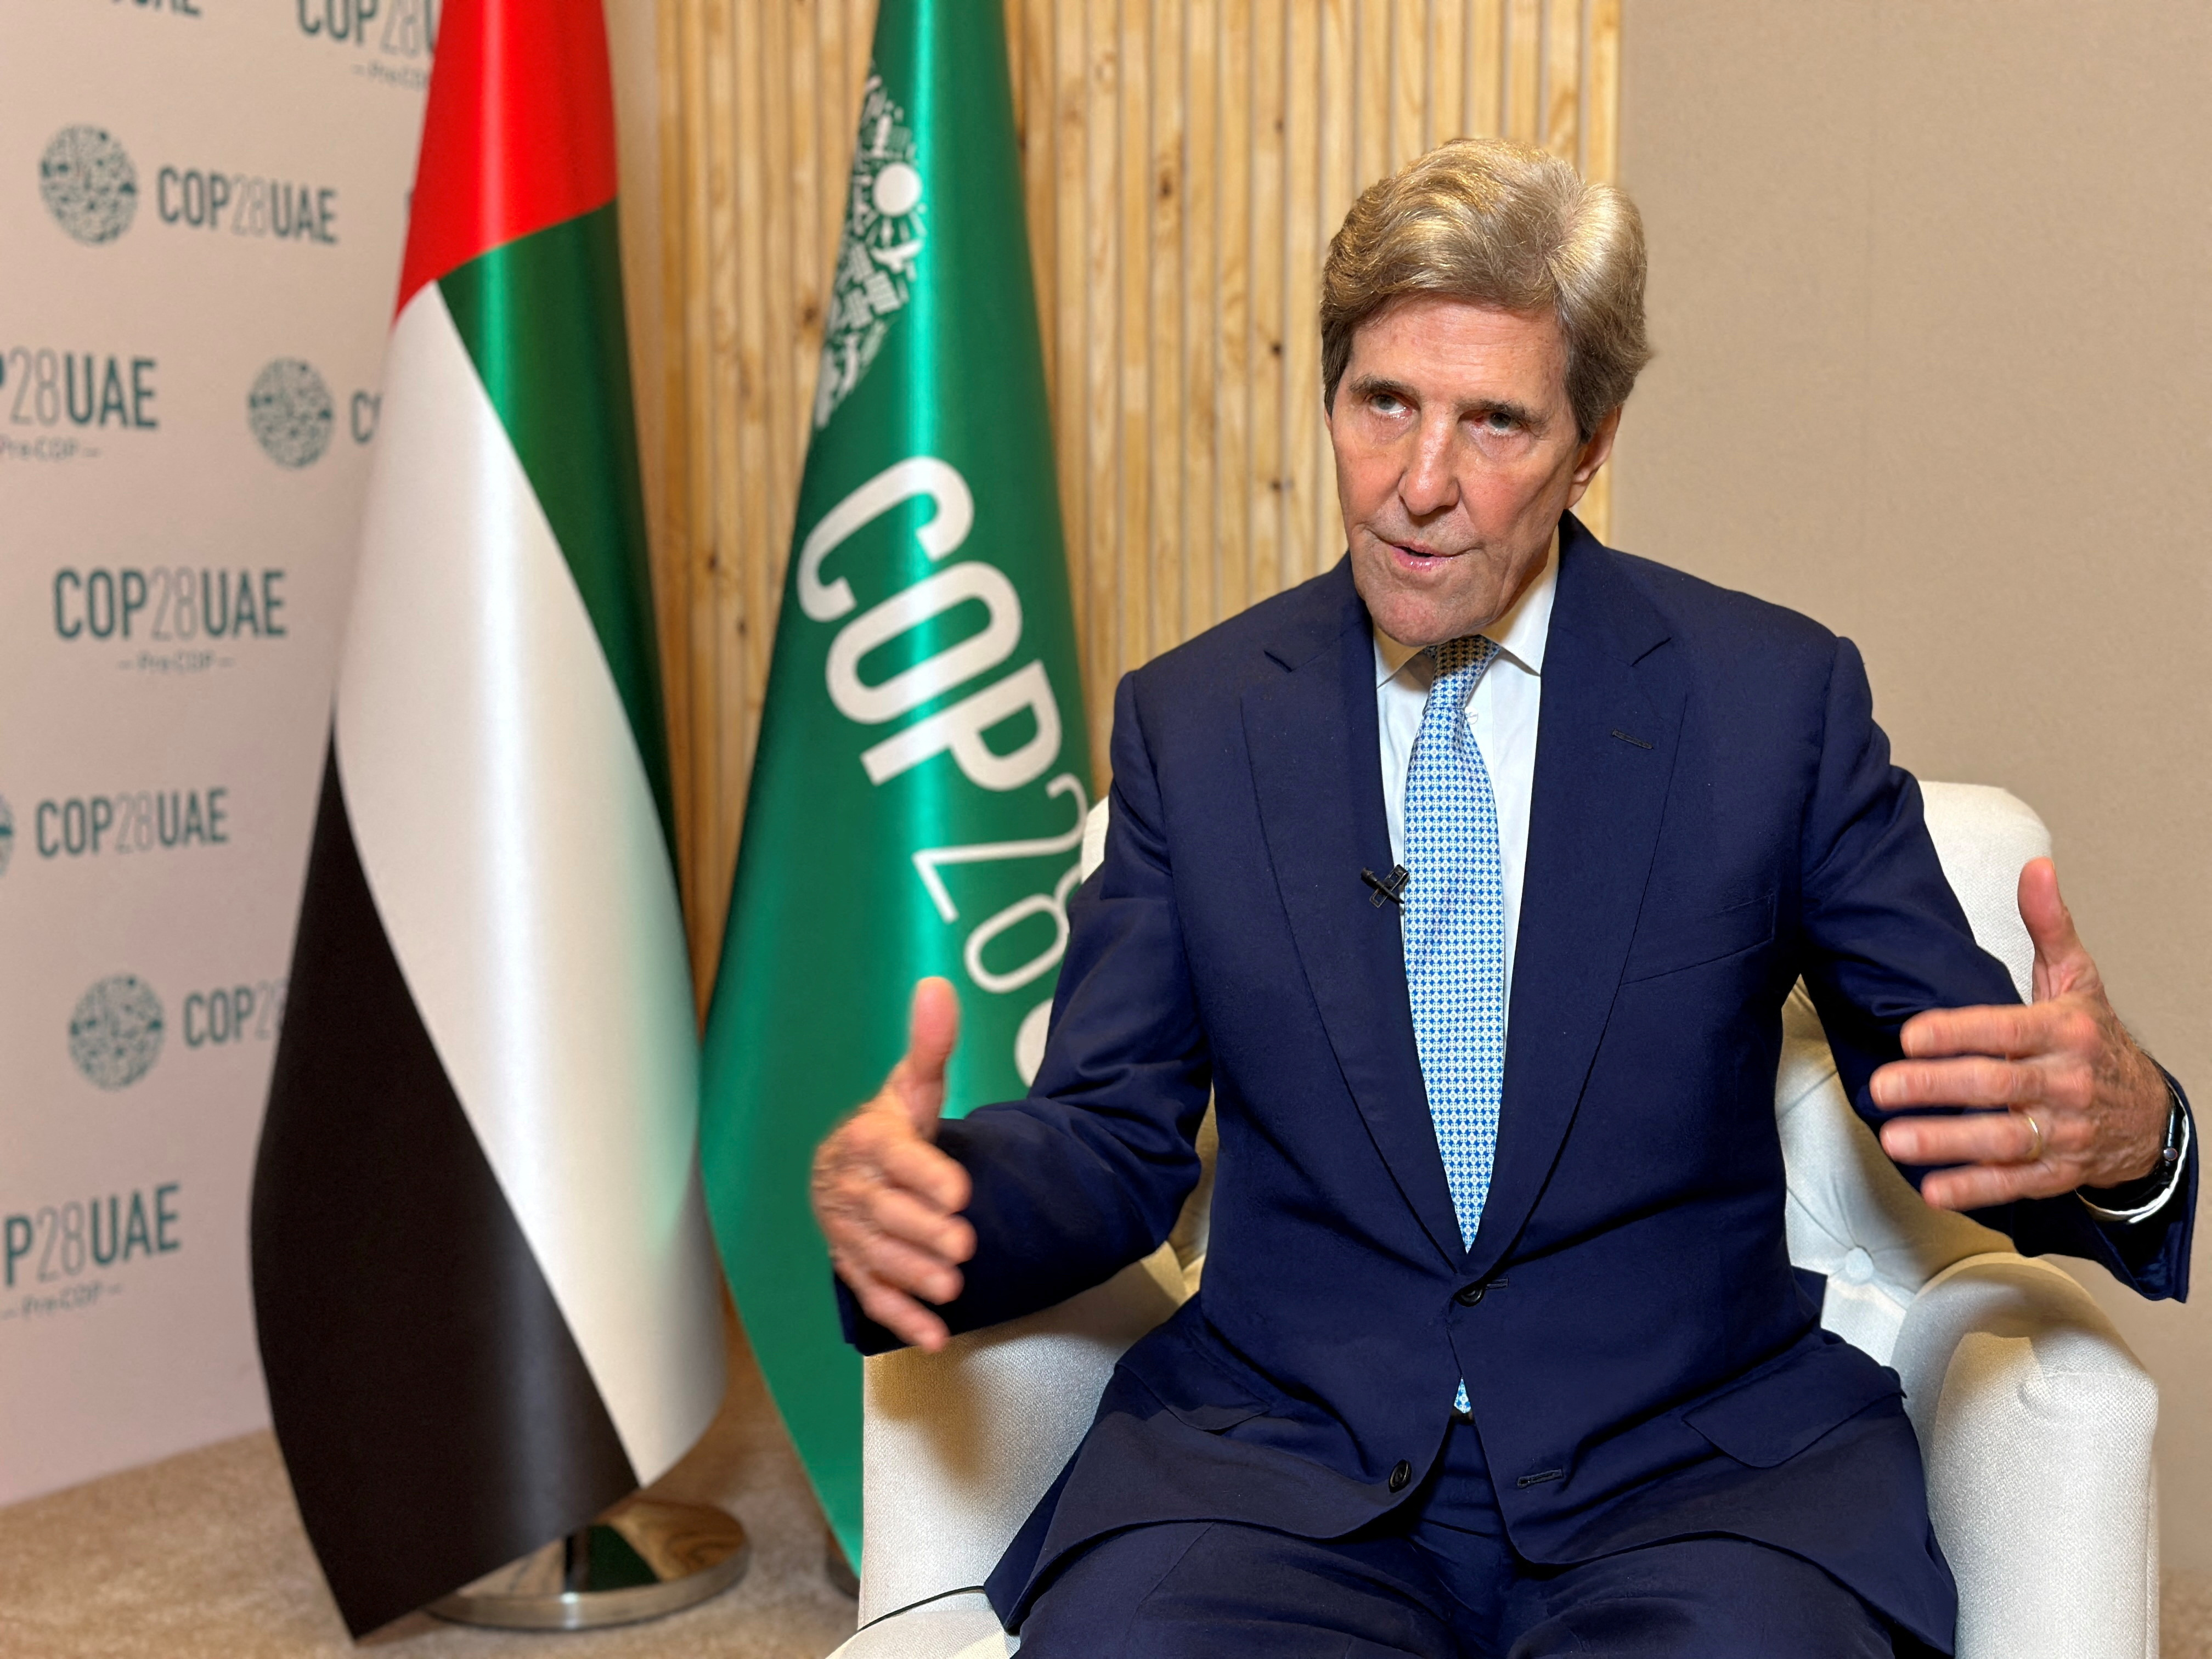 John Kerry, U.S. Special Presidential Envoy for Climate speaks during an earlier interview with Reuters, in  Abu Dhabi